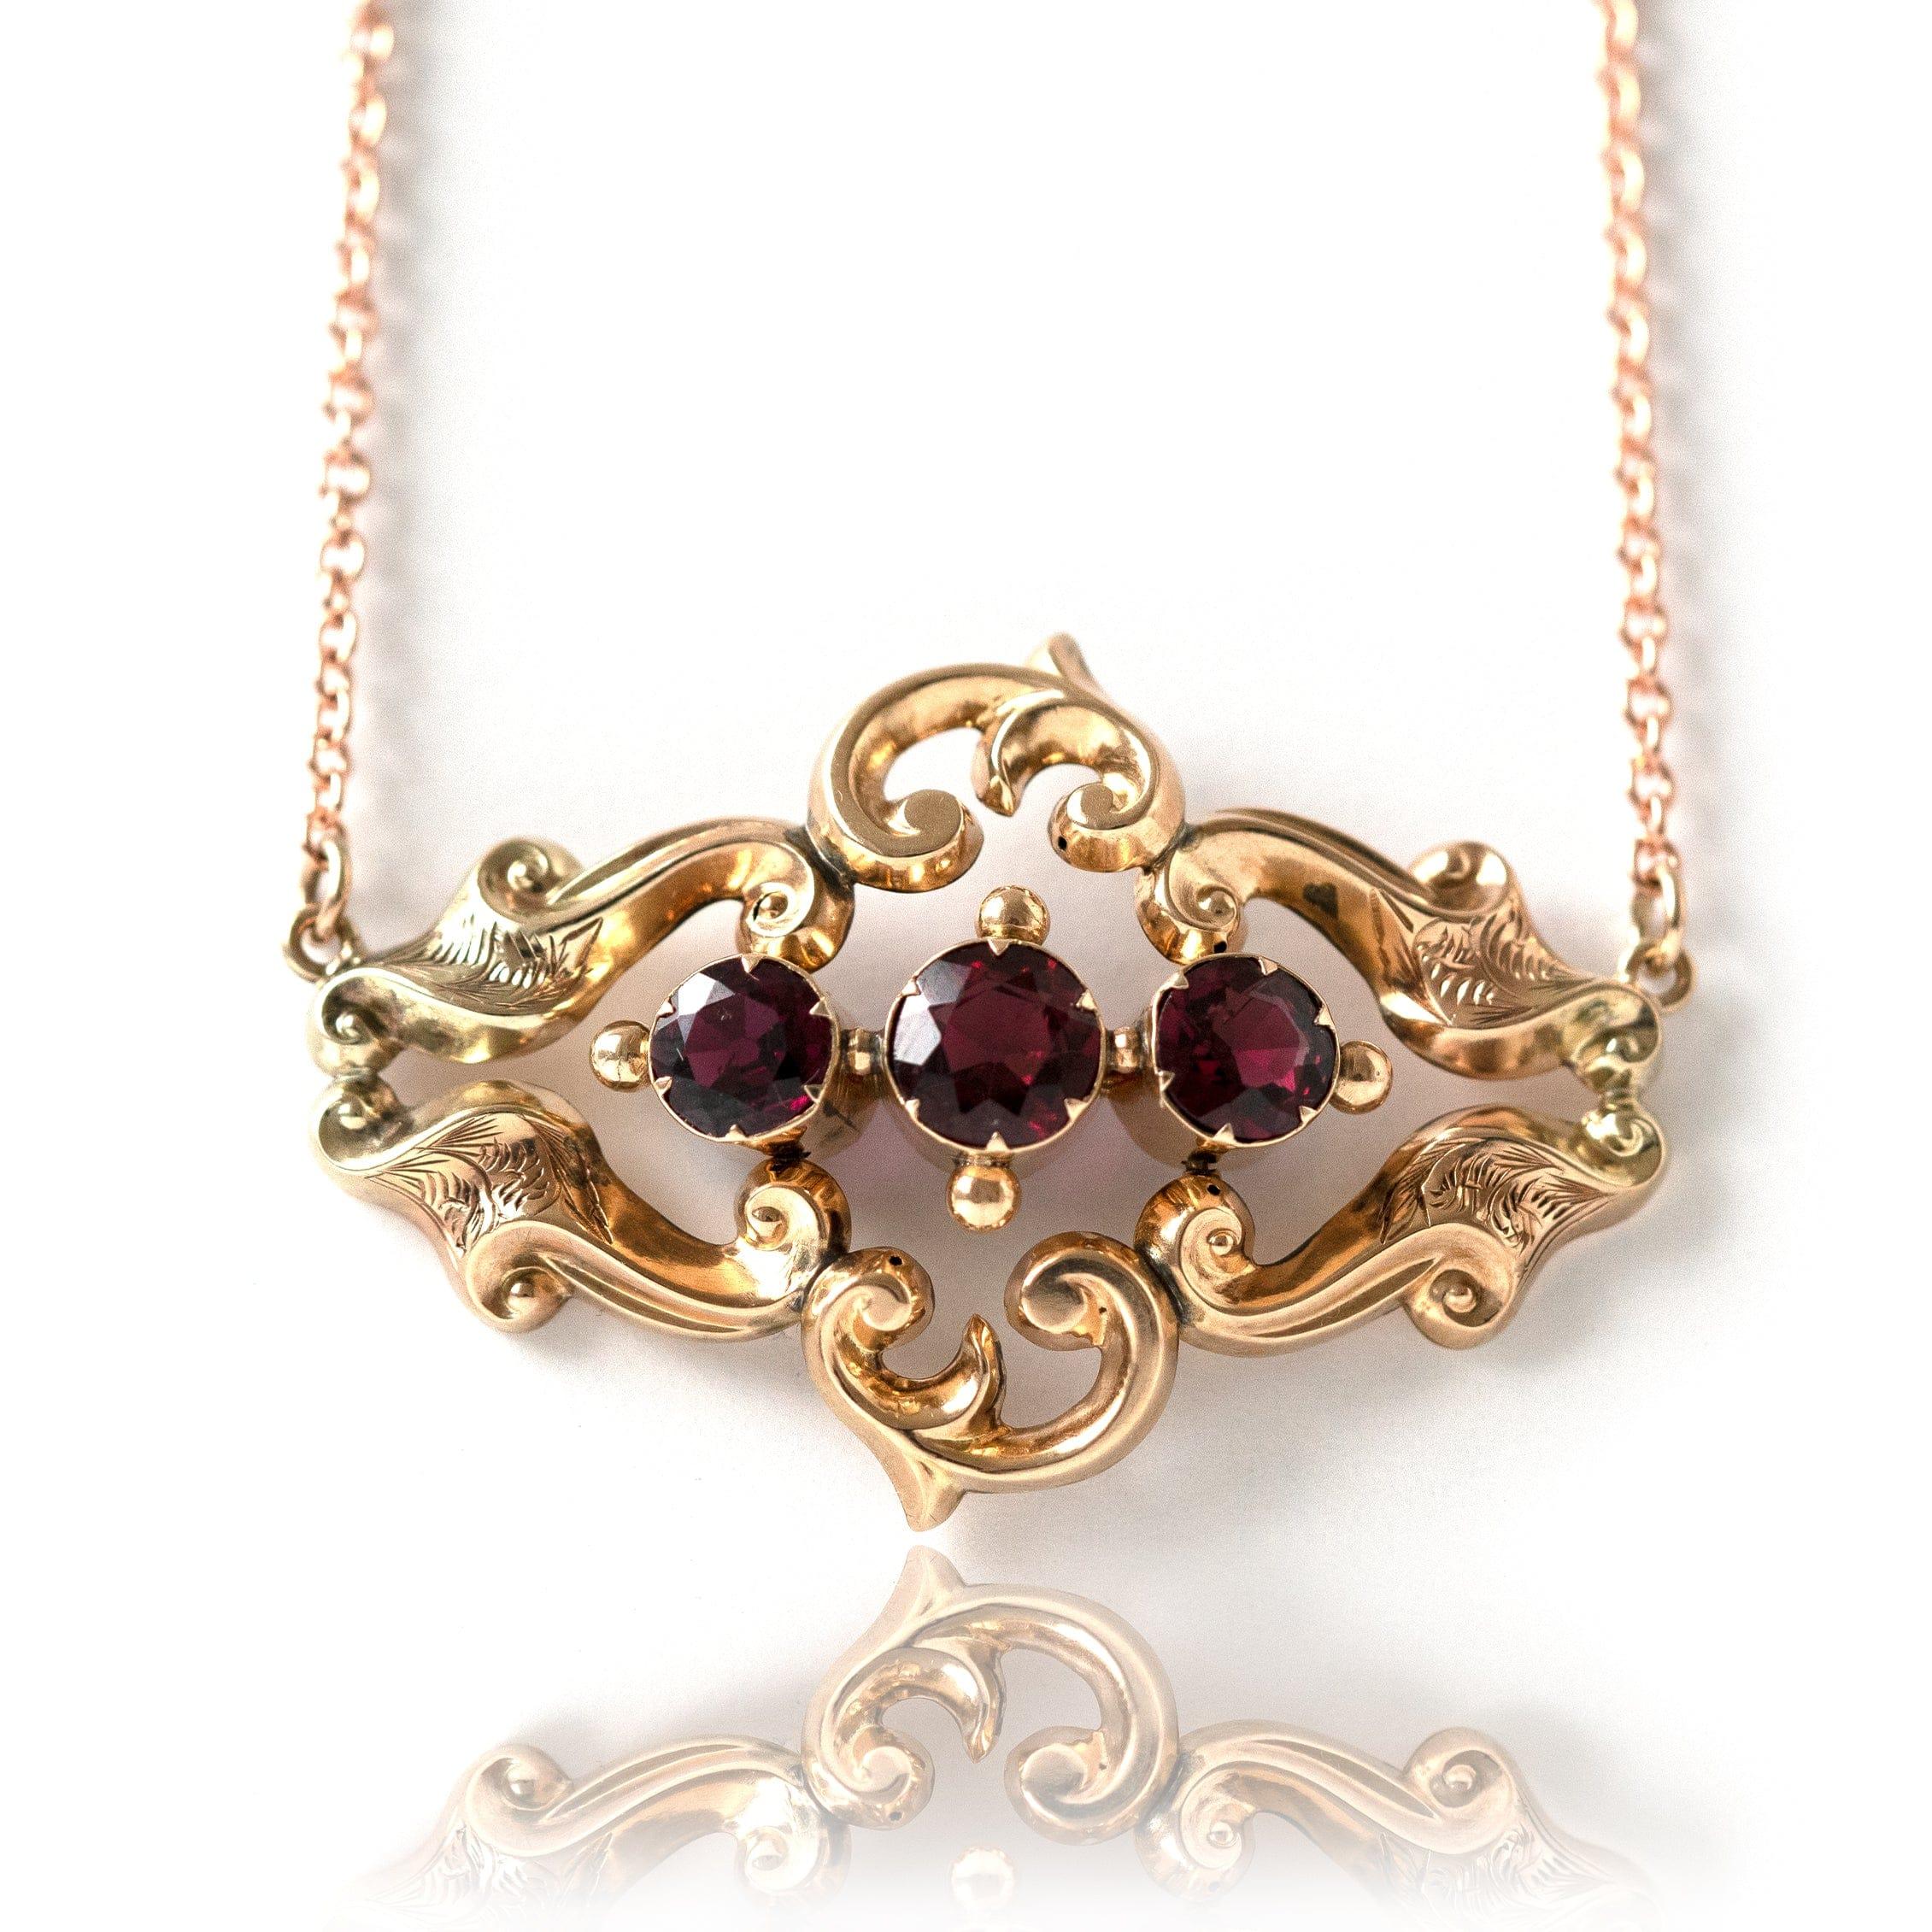 Antique Victorian Garnet Gold Ornate Necklace In Excellent Condition For Sale In London, GB